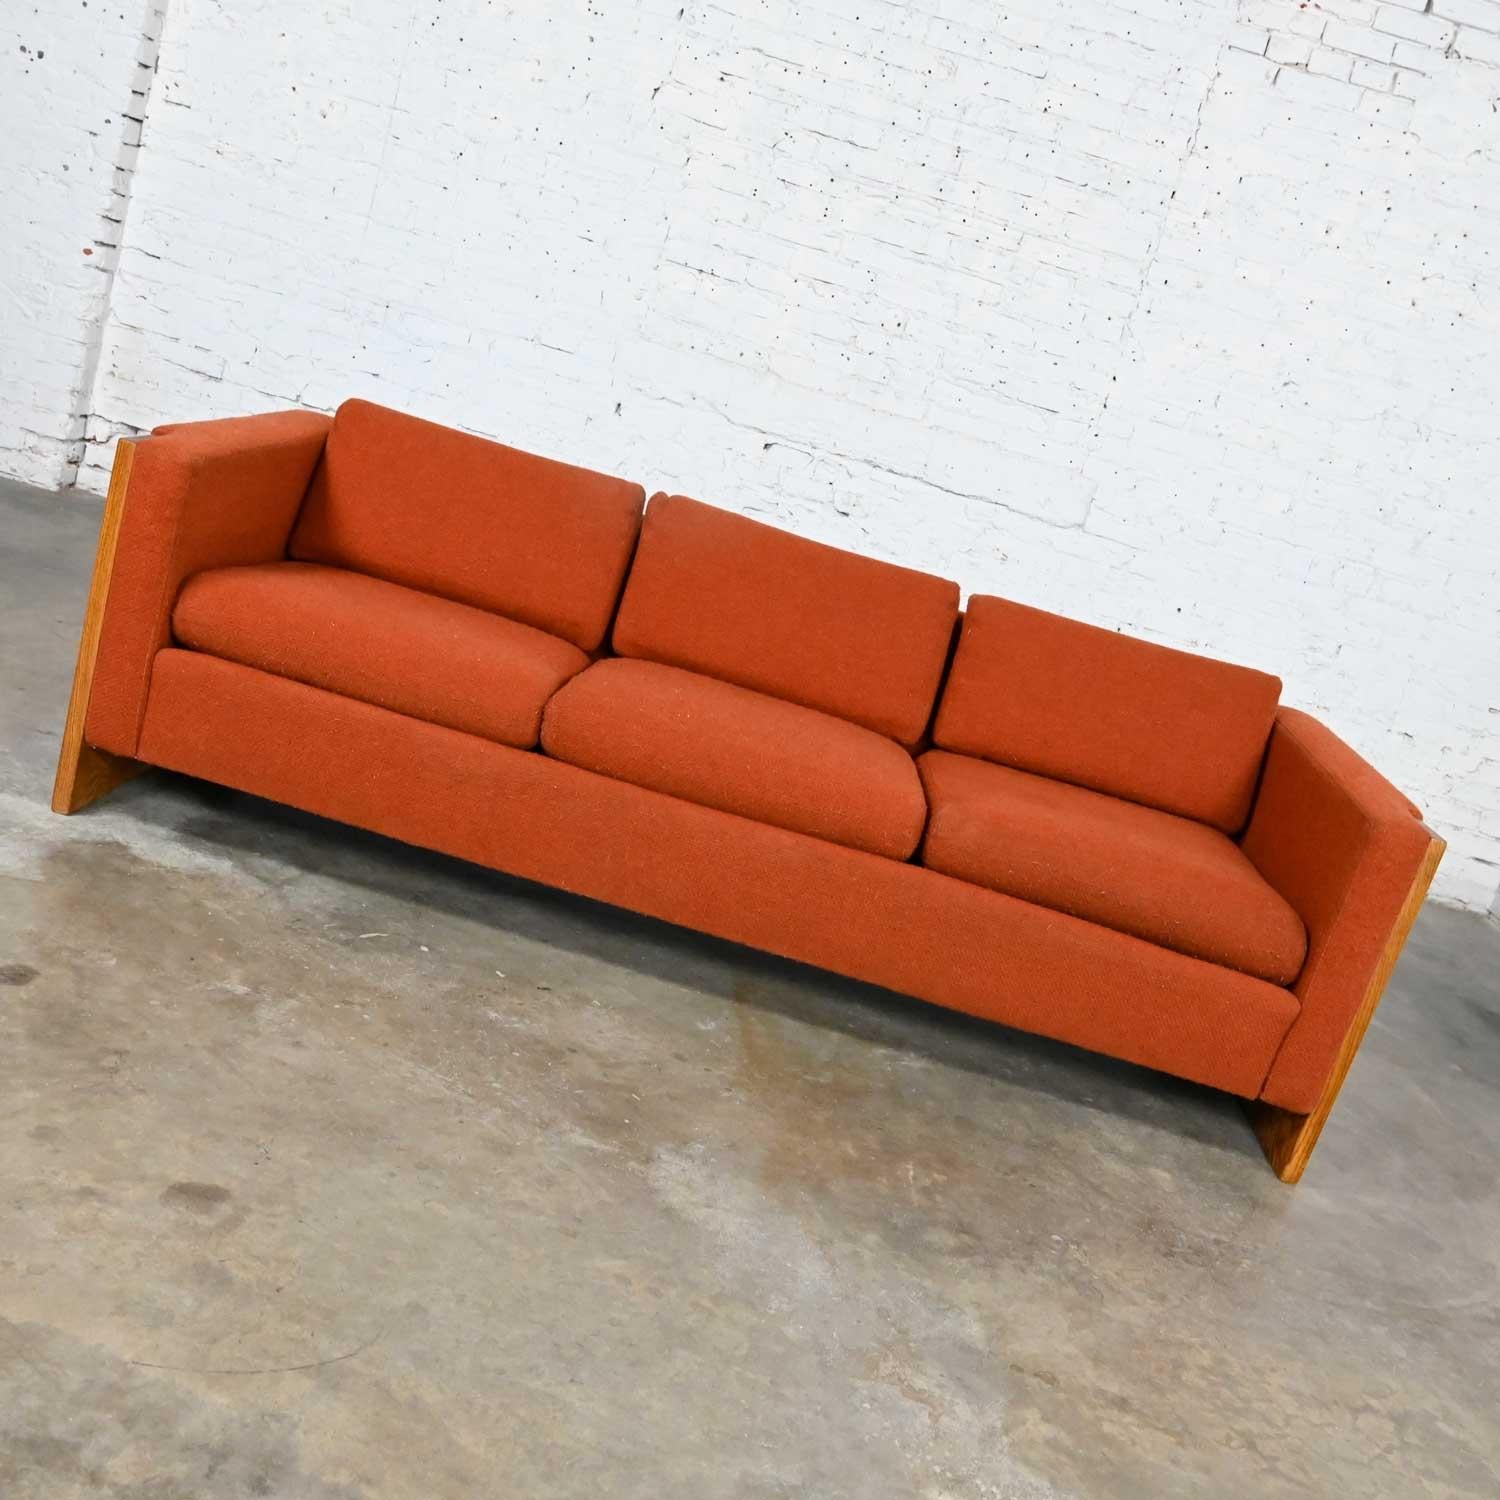 Fabulous Mid-Century Modern to modern tuxedo style sofa with oak frame and rust or burnt orange large-weave hopsacking fabric. Beautiful condition, keeping in mind that this is vintage and not new so will have signs of use and wear. There is a bit